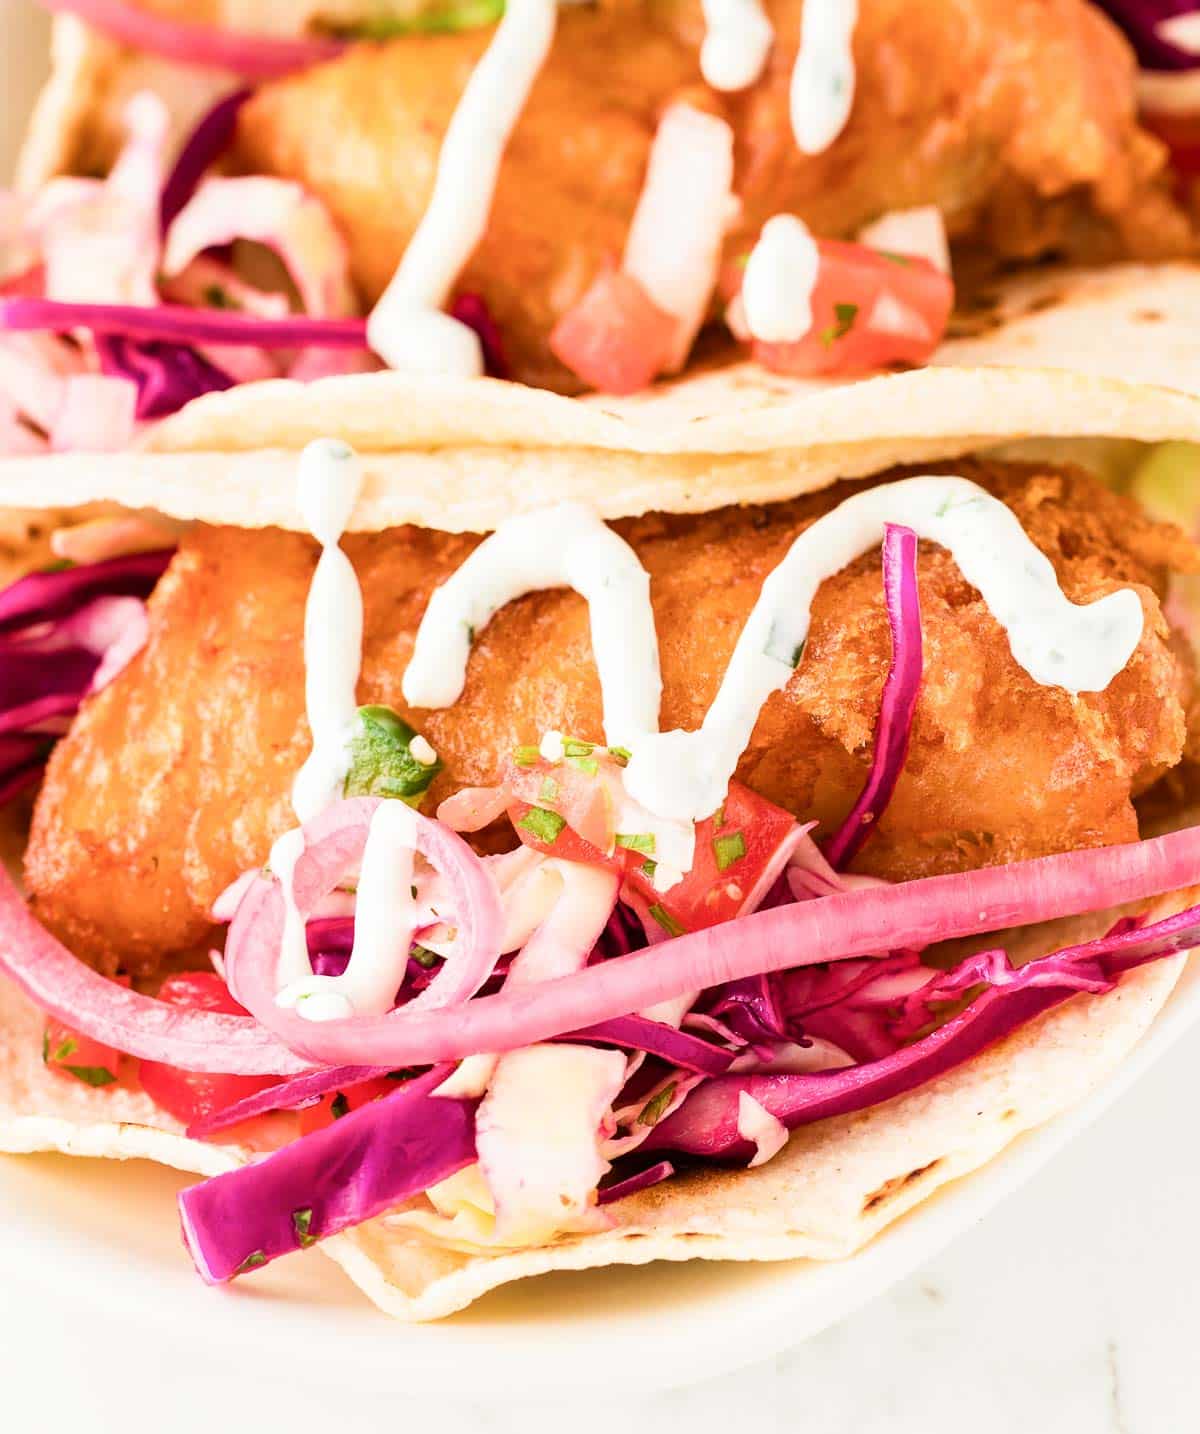 Beer-battered fish tacos with red cabbage slaw and a drizzle of creamy sauce.